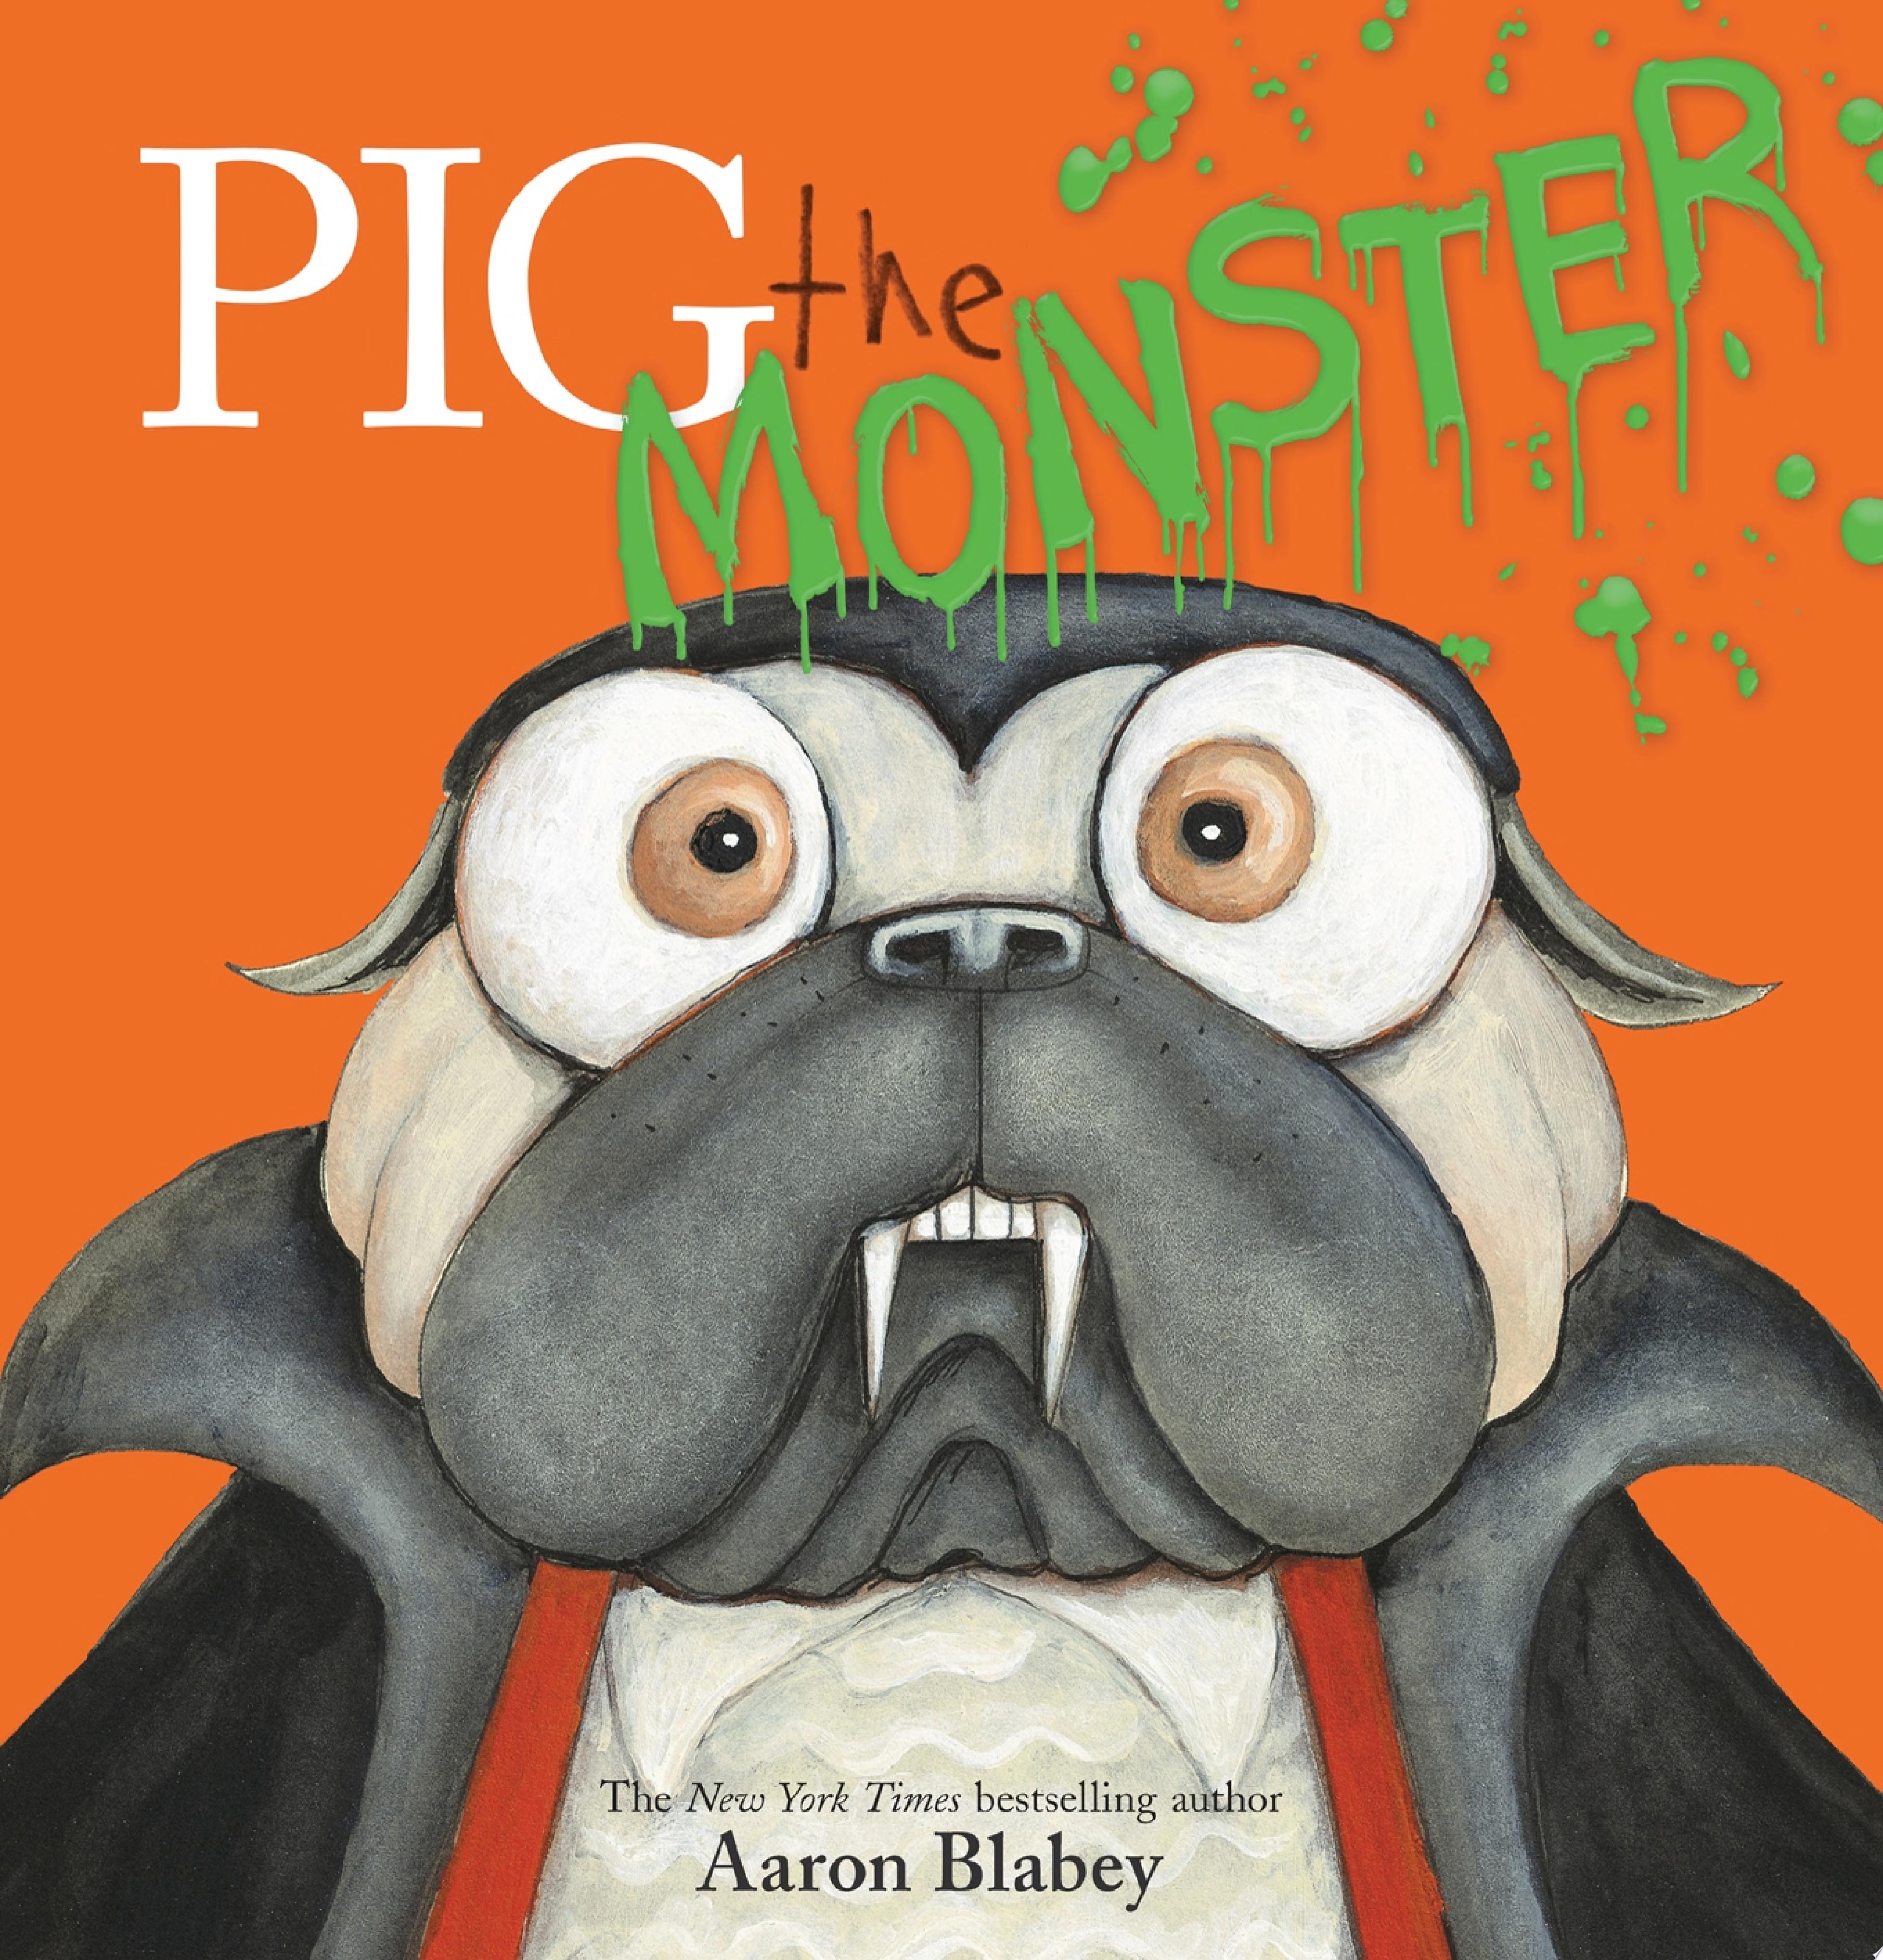 Image for "Pig the Monster"